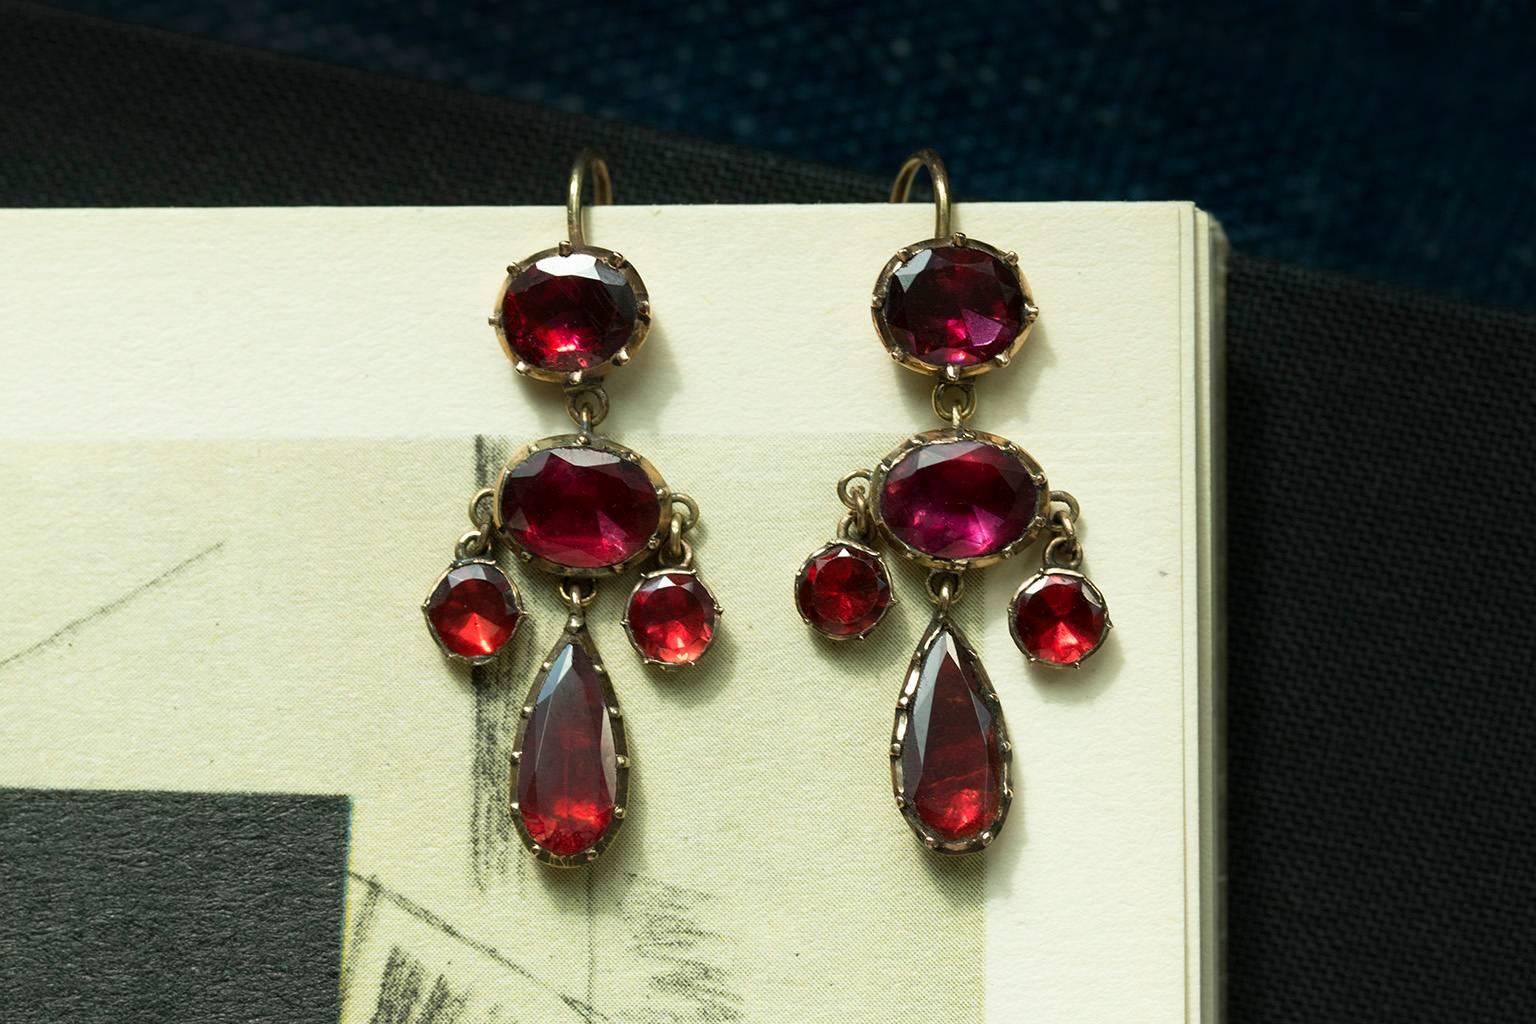 Early 19th century garnet petite girandole earrings. The stones are foil-backed, and they glow beautifully with light. The earrings test about 15k gold including the ear wires. Very easy to wear, and overall in good condition. 

Total Drop: